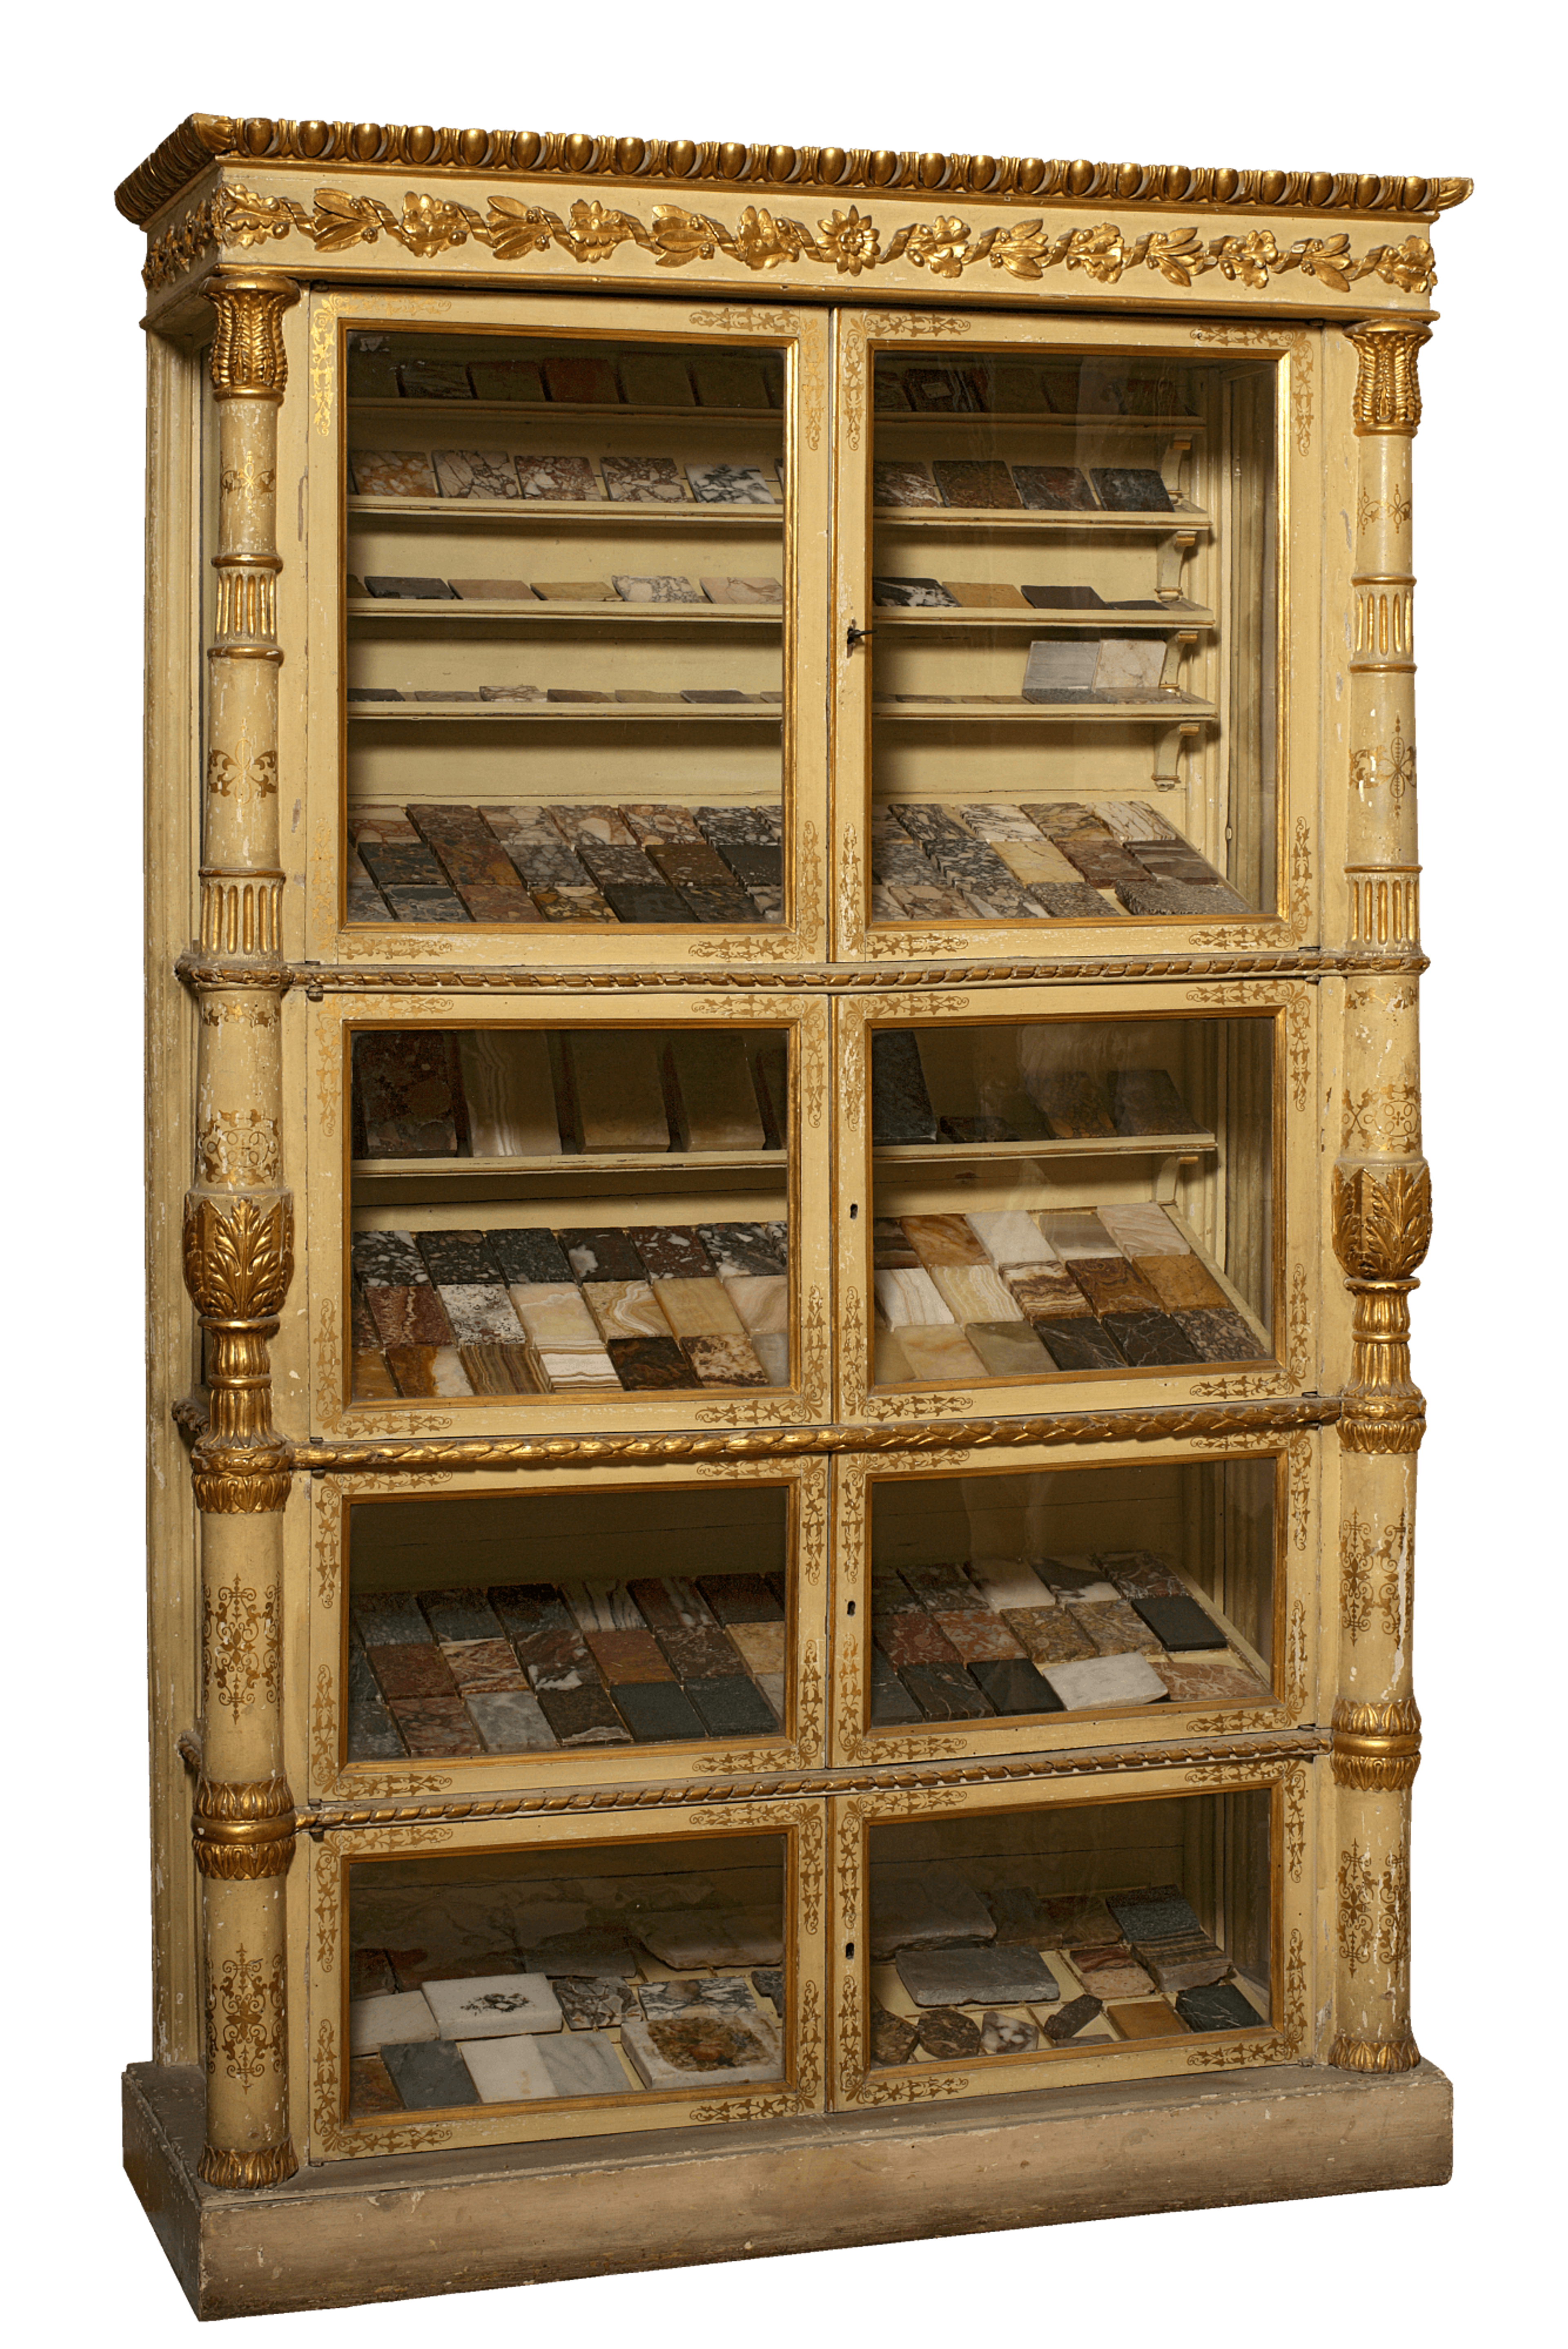 Two display cabinets with marble samples